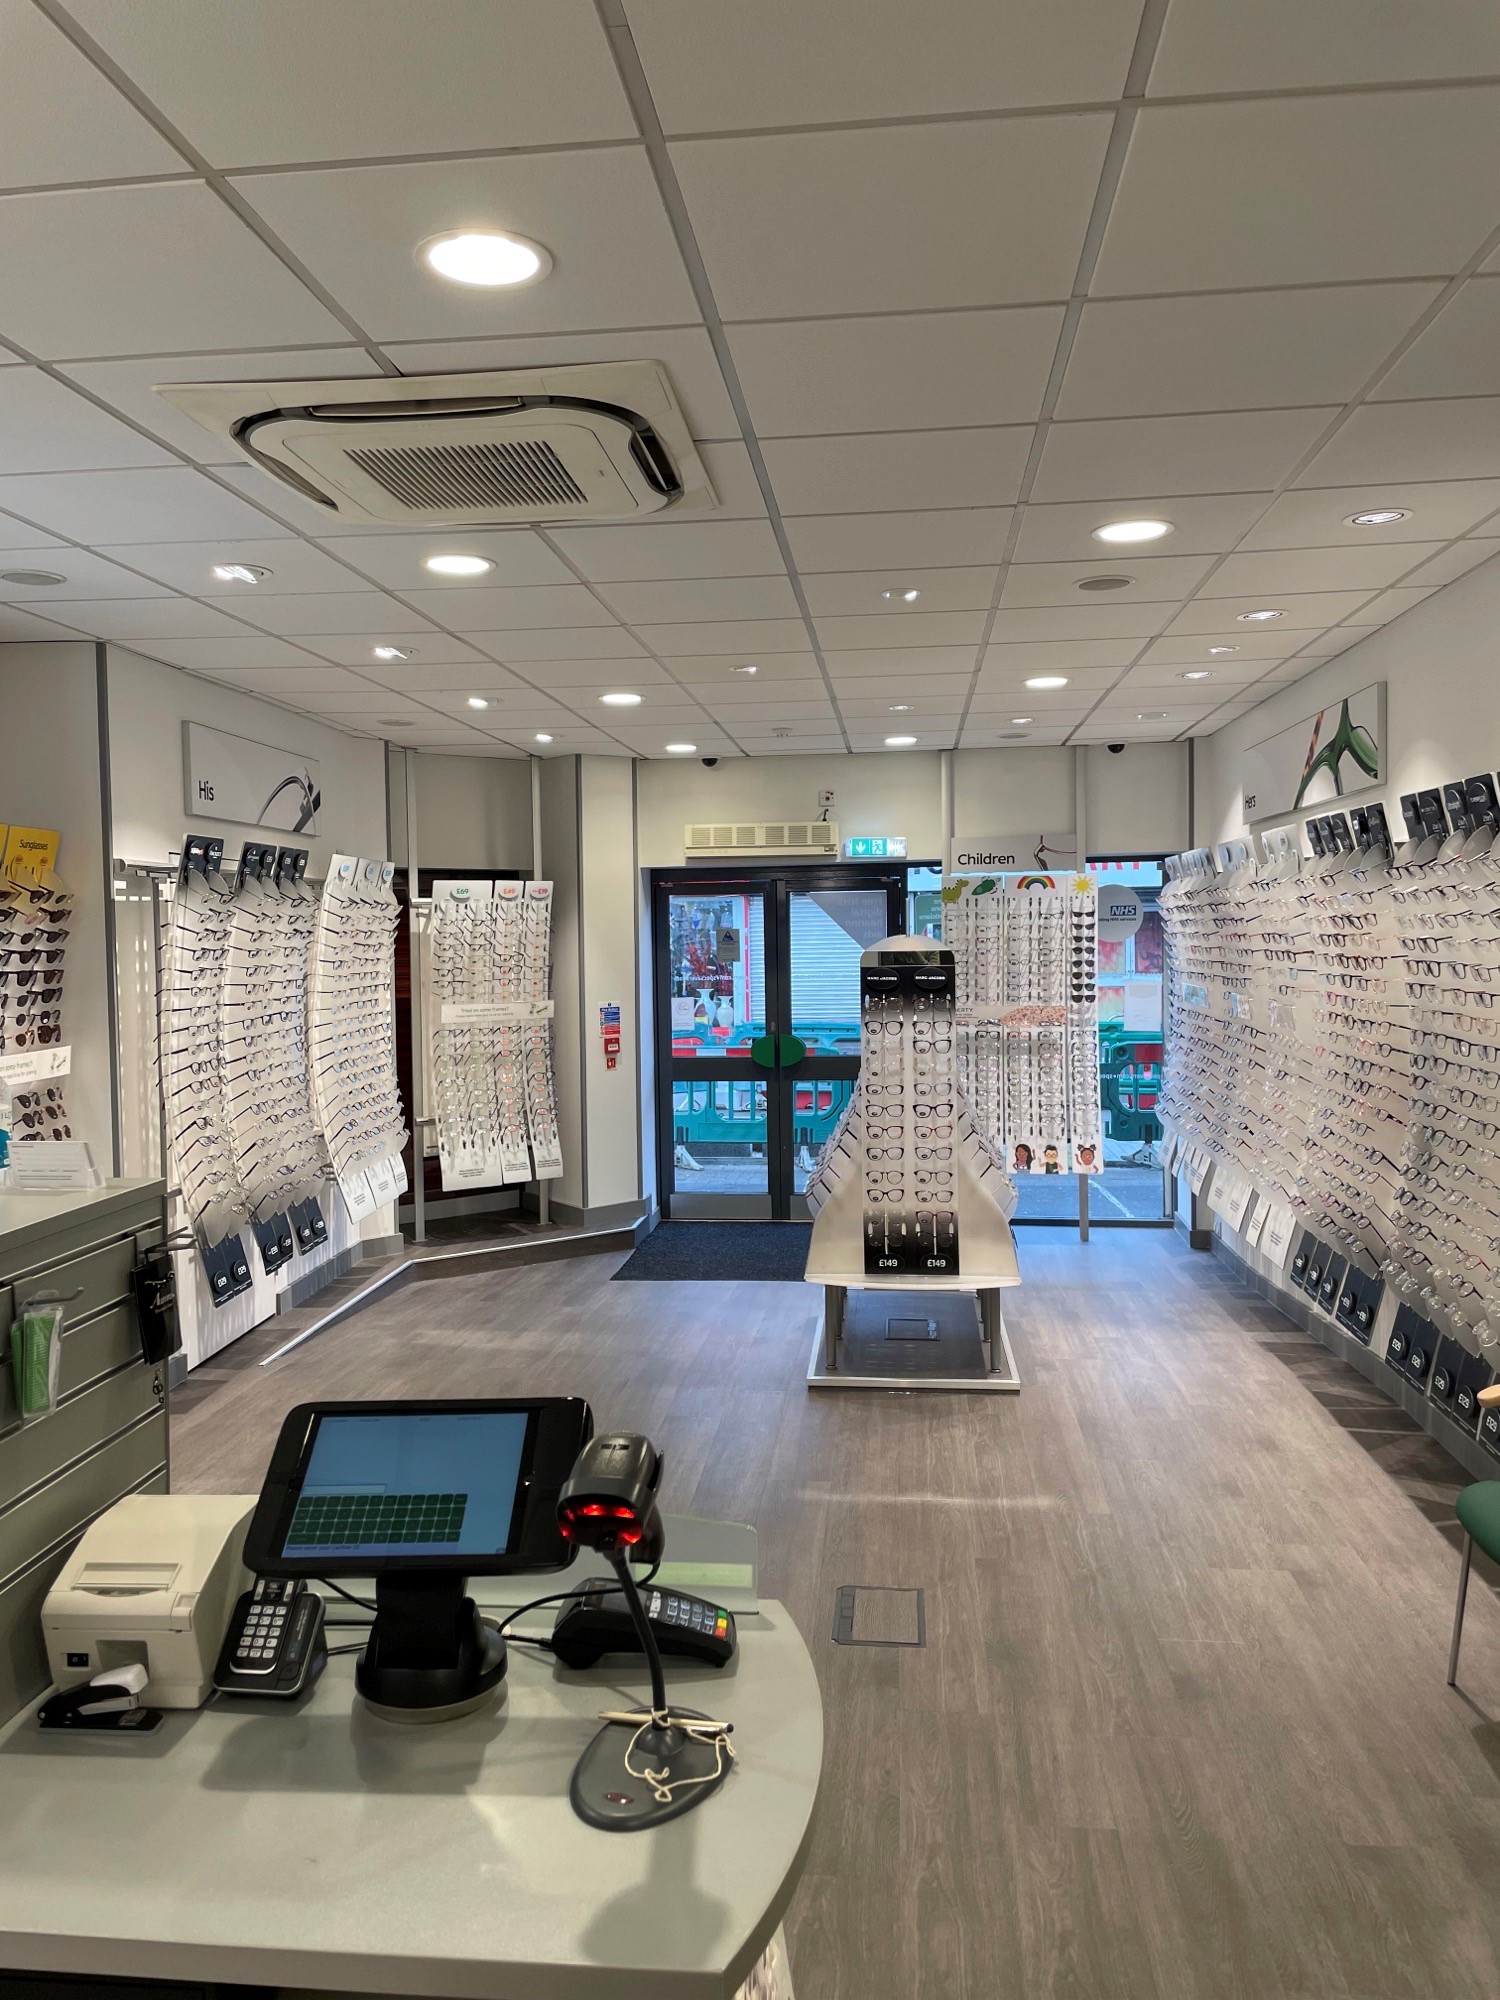 Specsavers Fulham Specsavers Opticians and Audiologists - Fulham Fulham 020 7471 0390